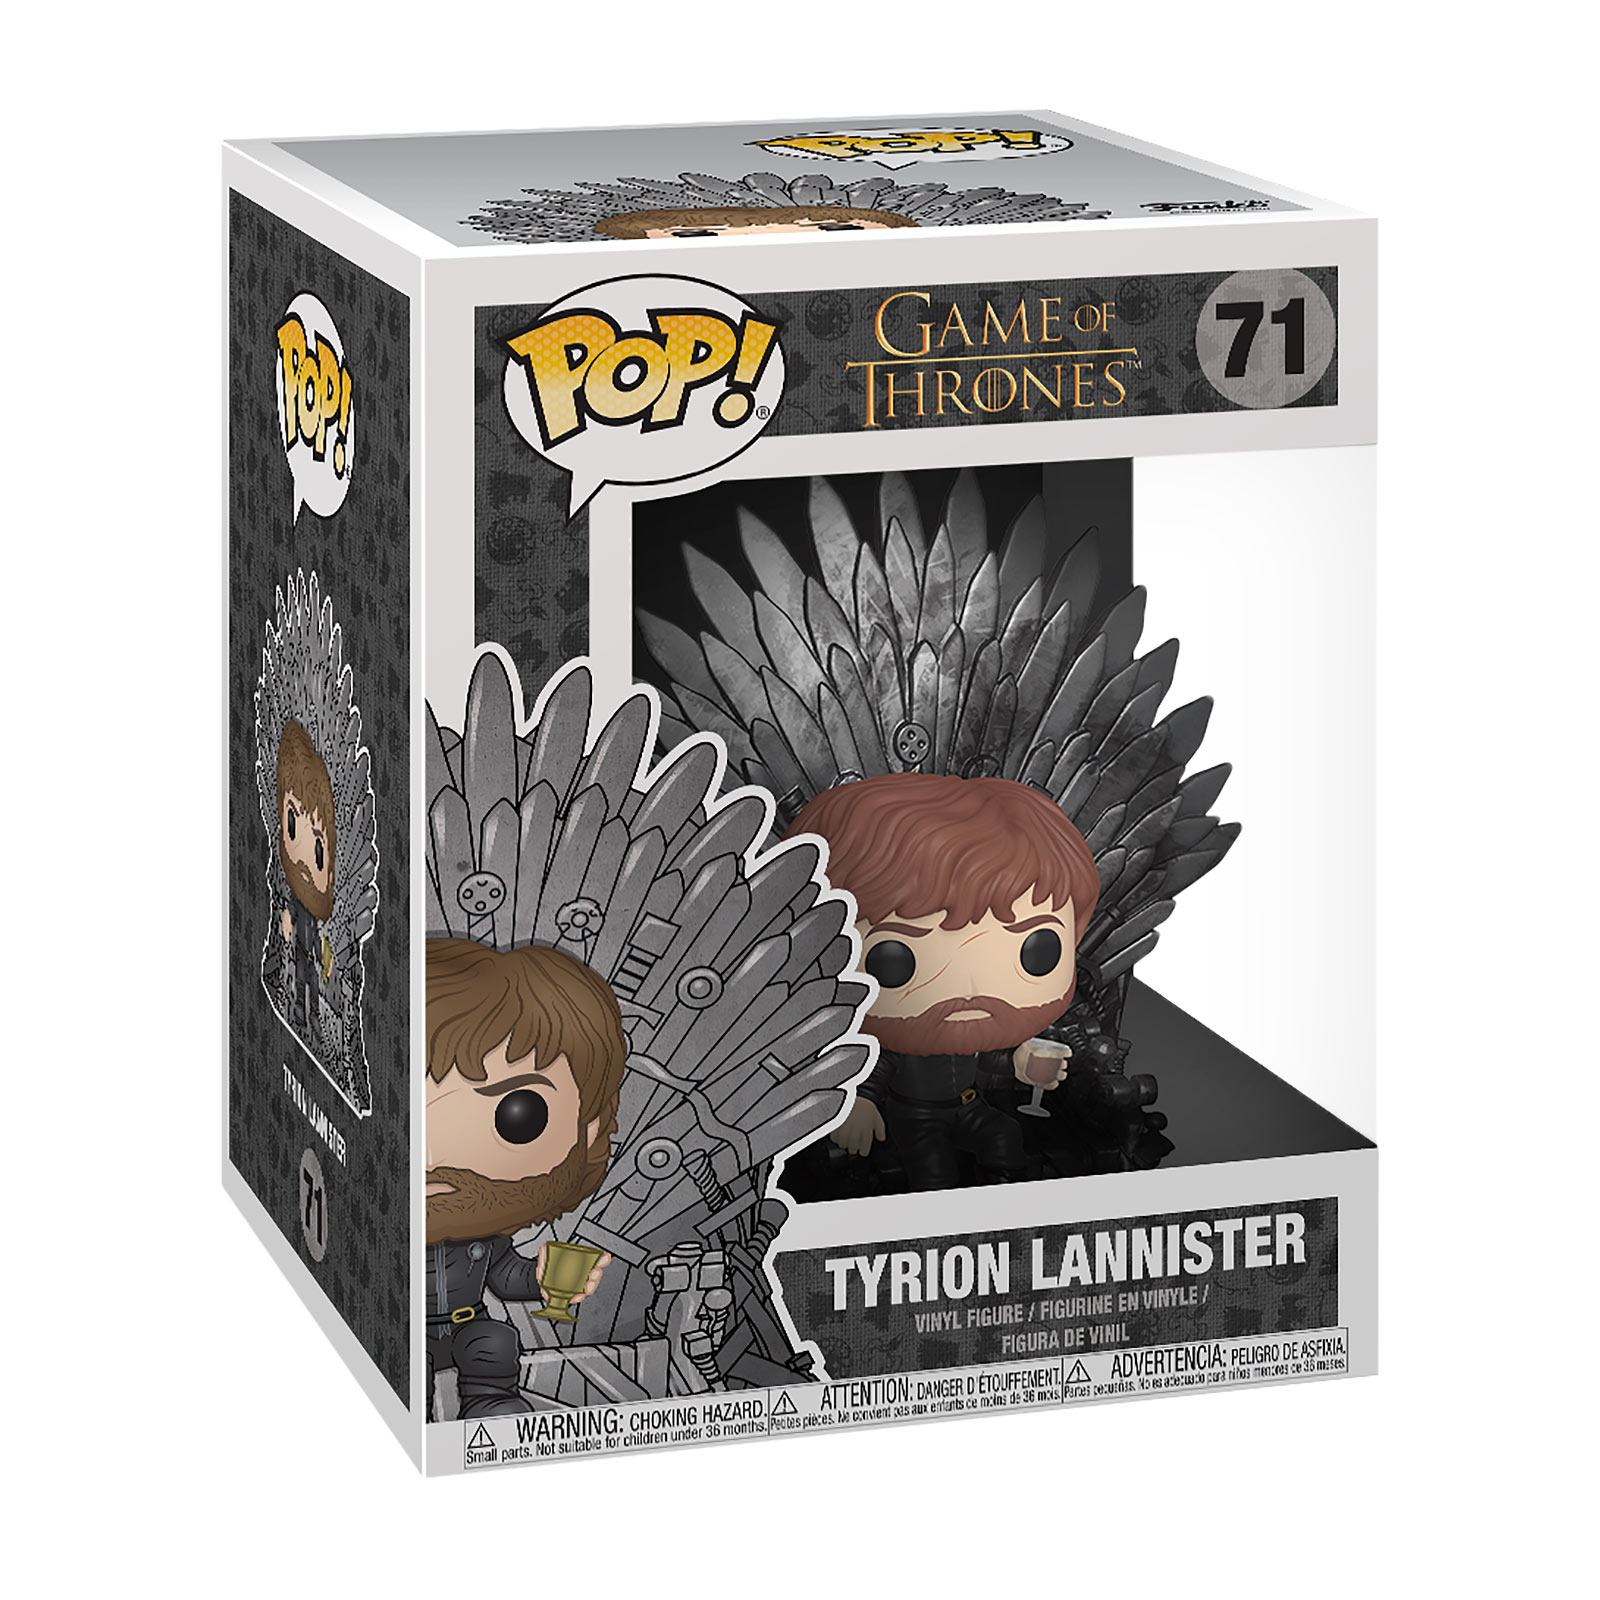 Game of Thrones - Tyrion Lannister with Iron Throne Funko Pop Figurine